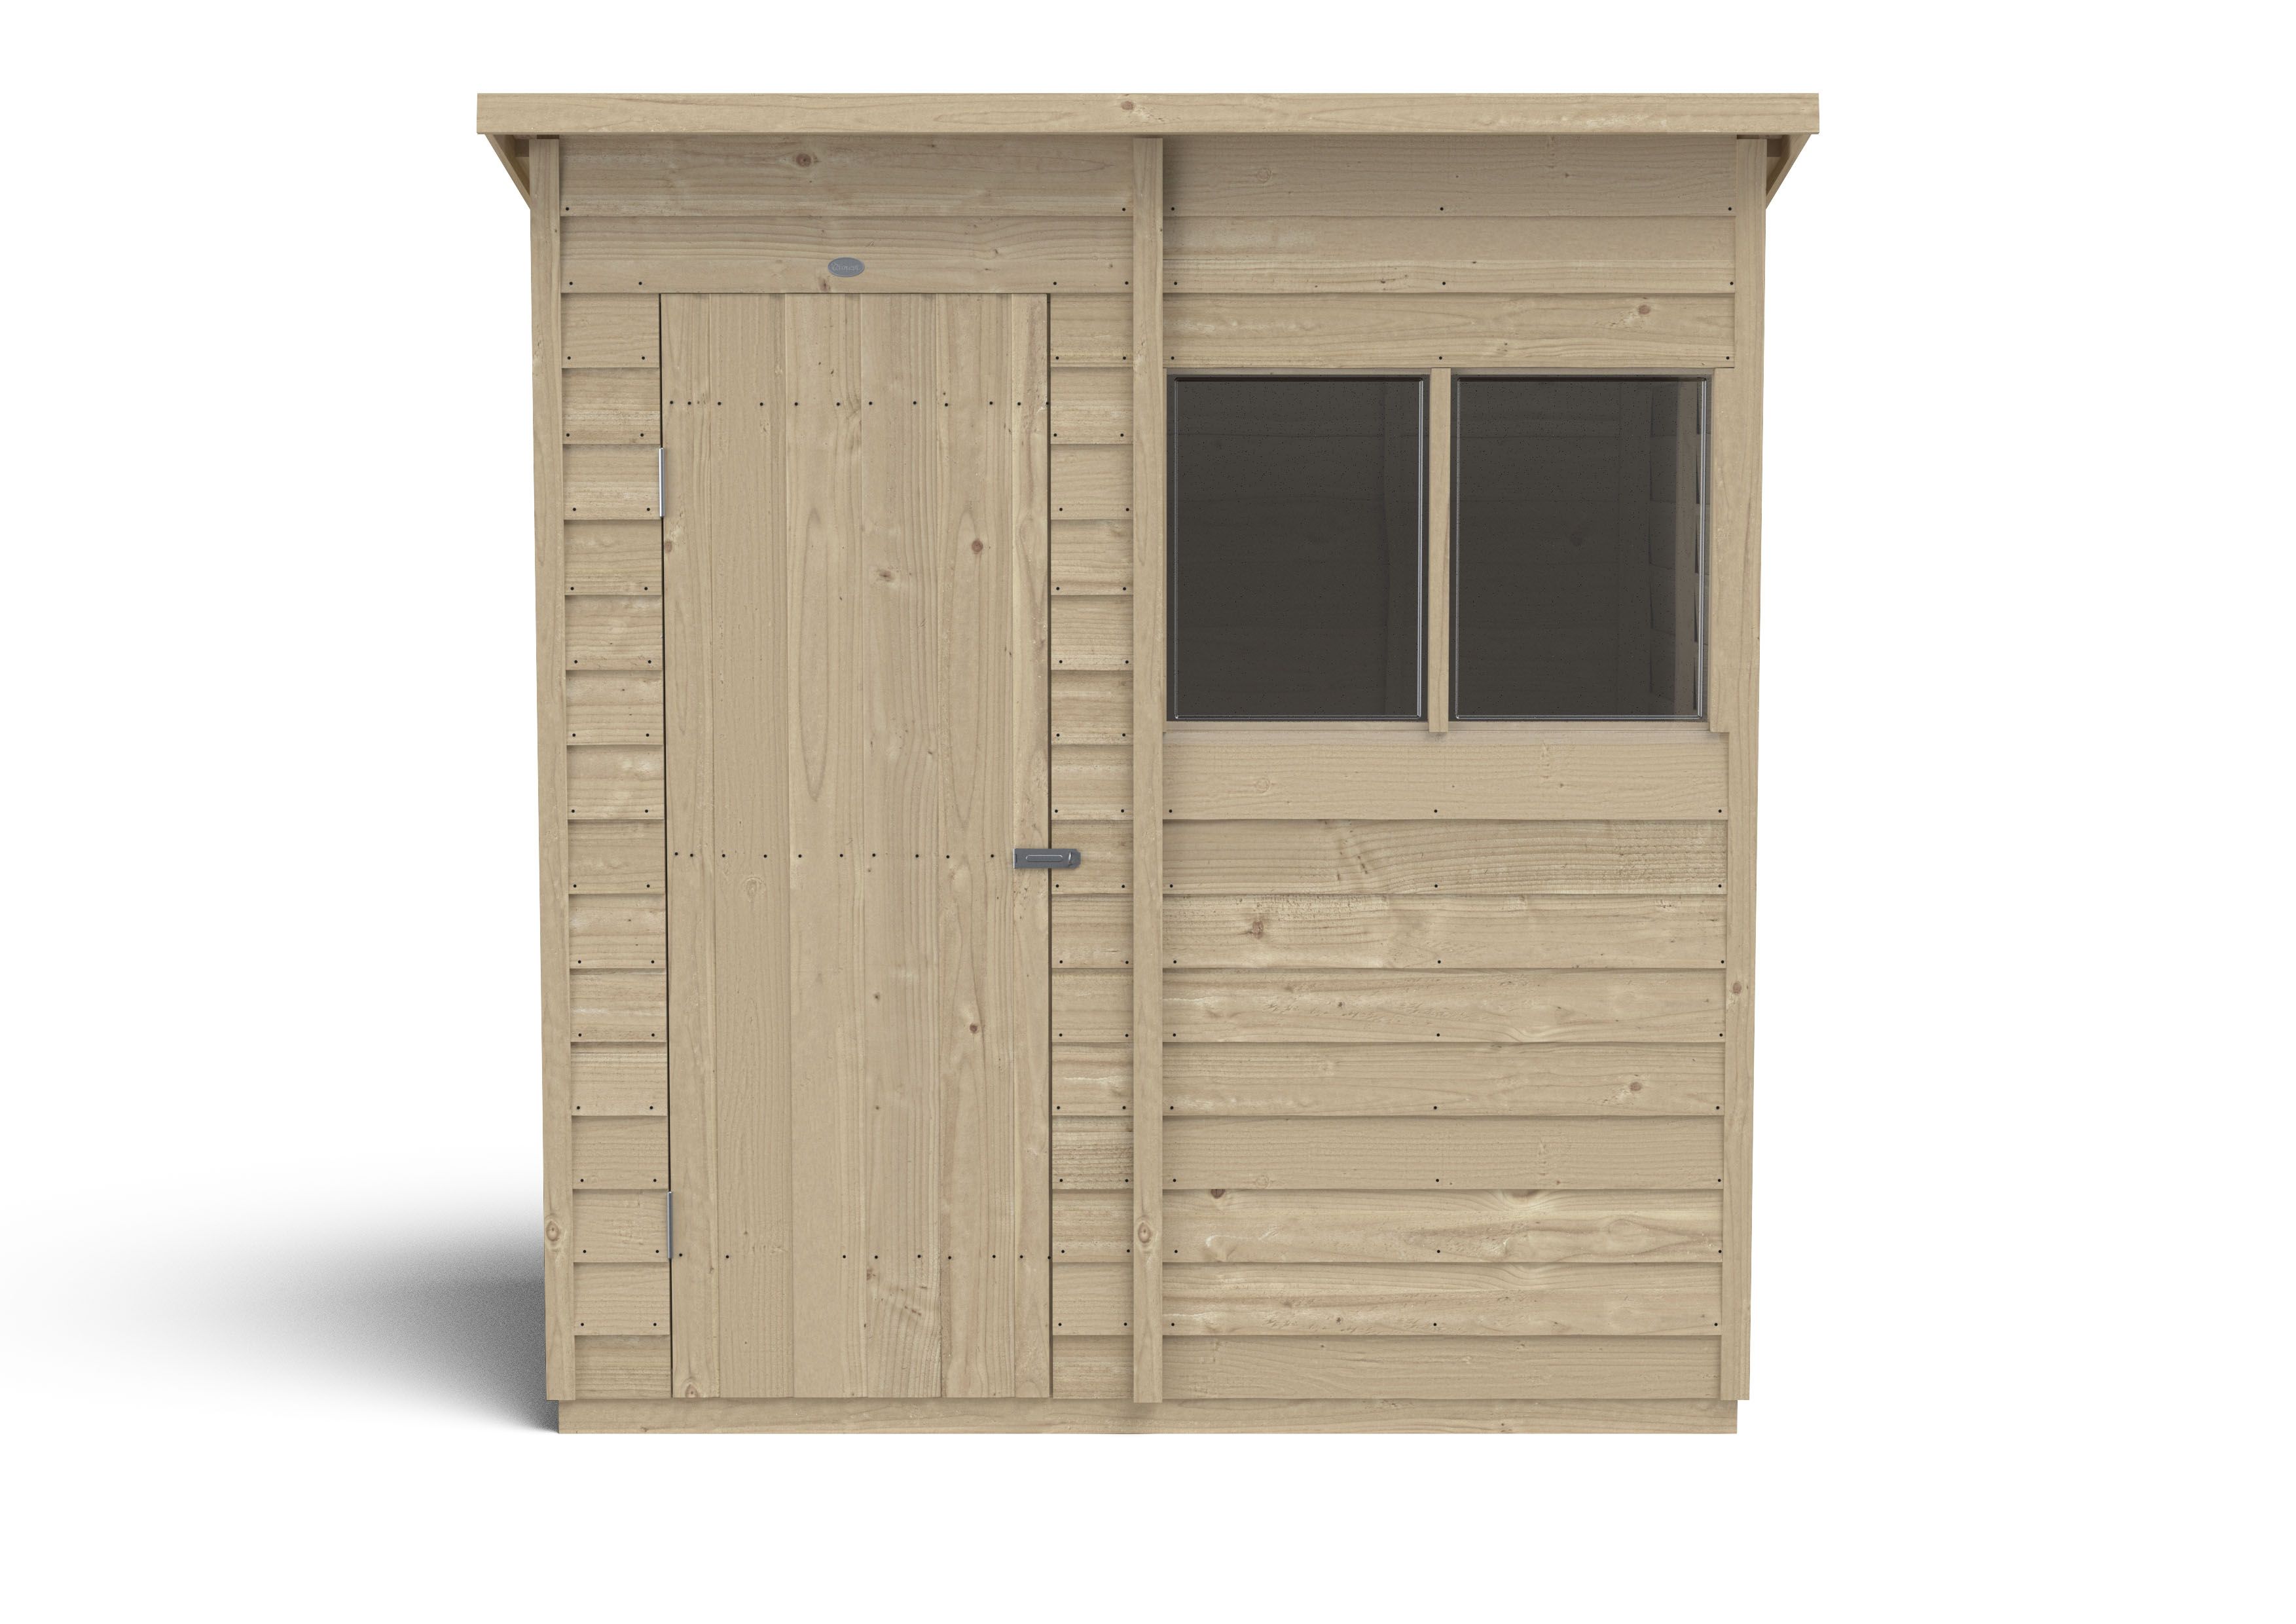 Forest Garden Overlap 6x4 ft Pent Wooden Pressure treated Shed with floor & 2 windows (Base included) - Assembly service included